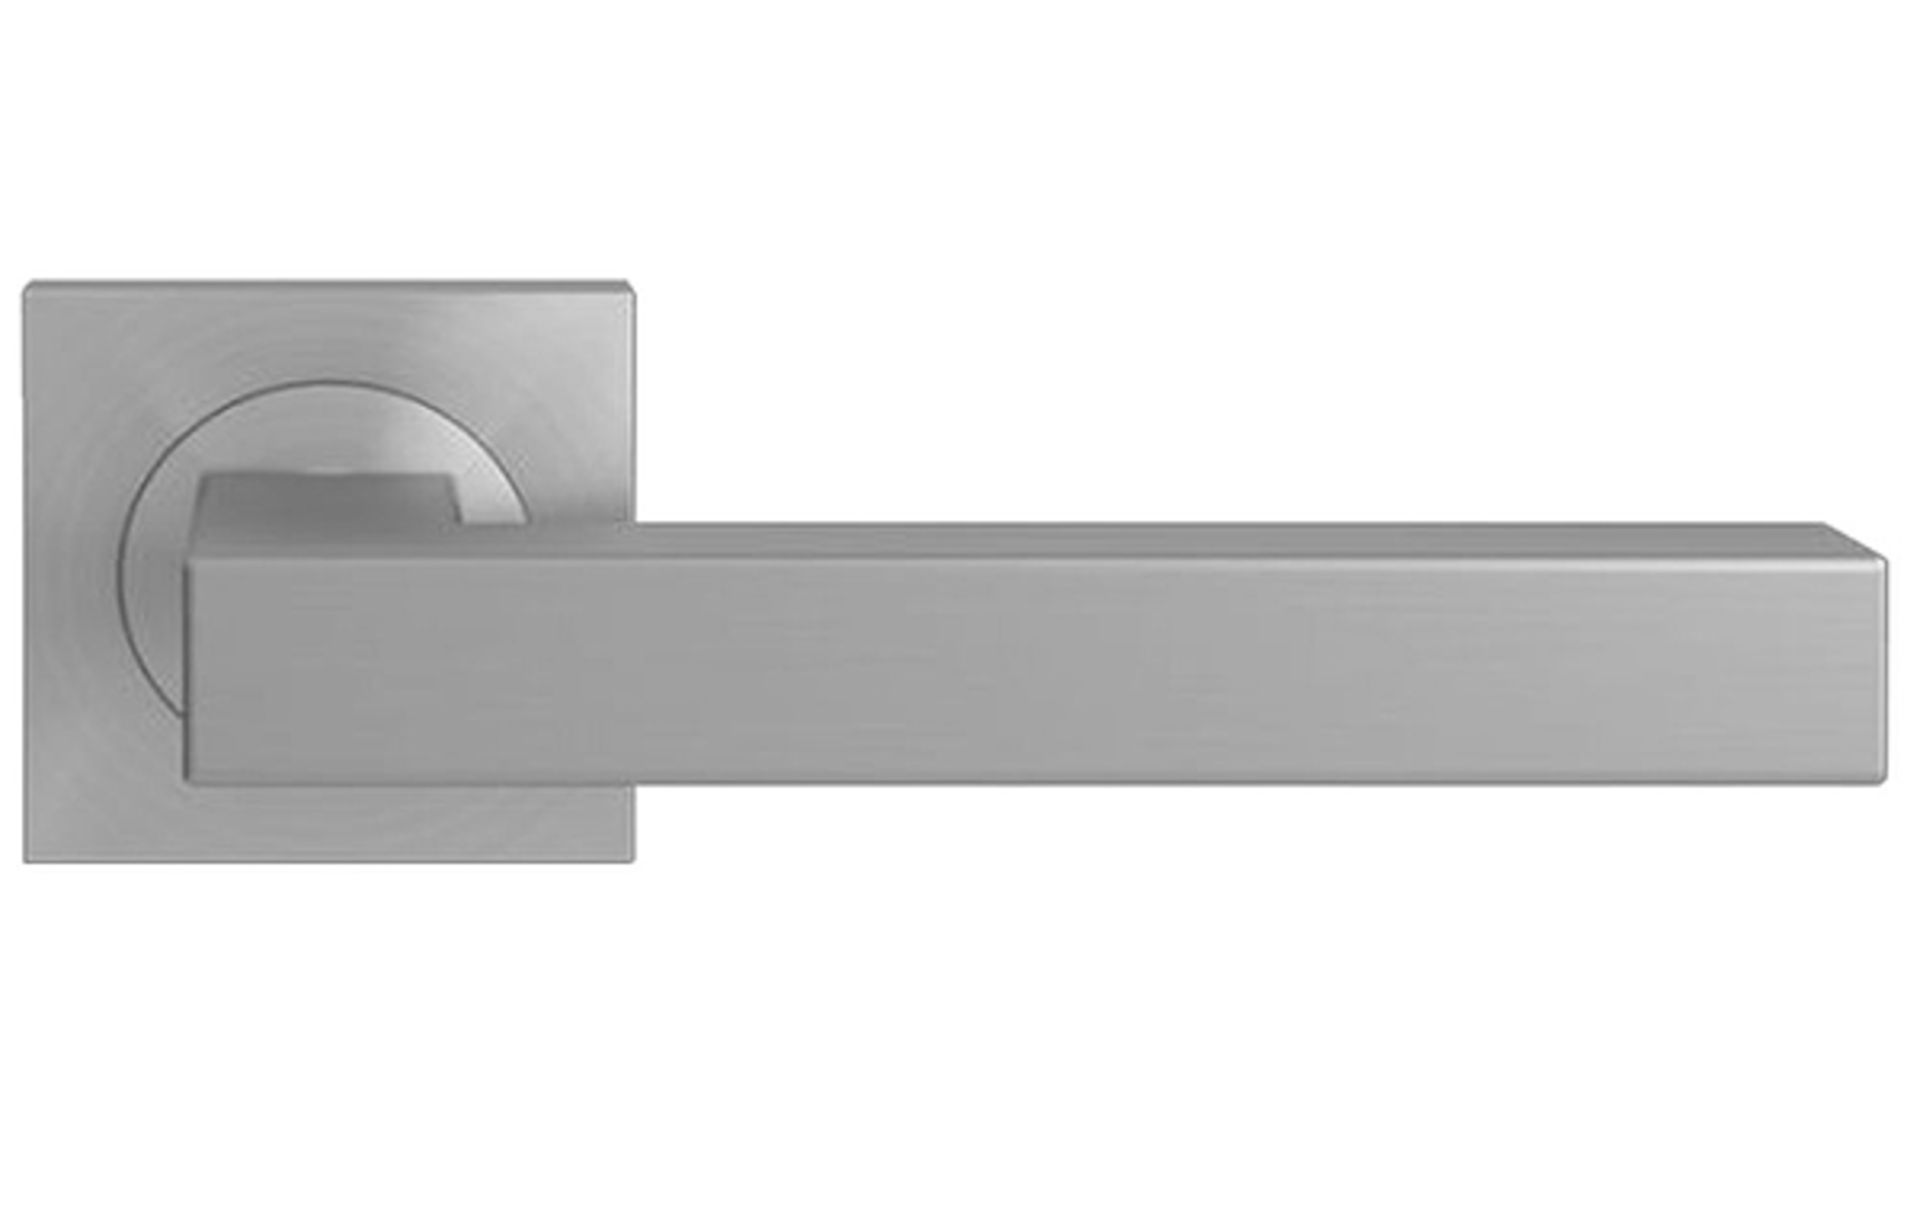 5 x Pairs of Karcher Design Door handle Seattle ER46Q-OS71 stainless steel on square rosette